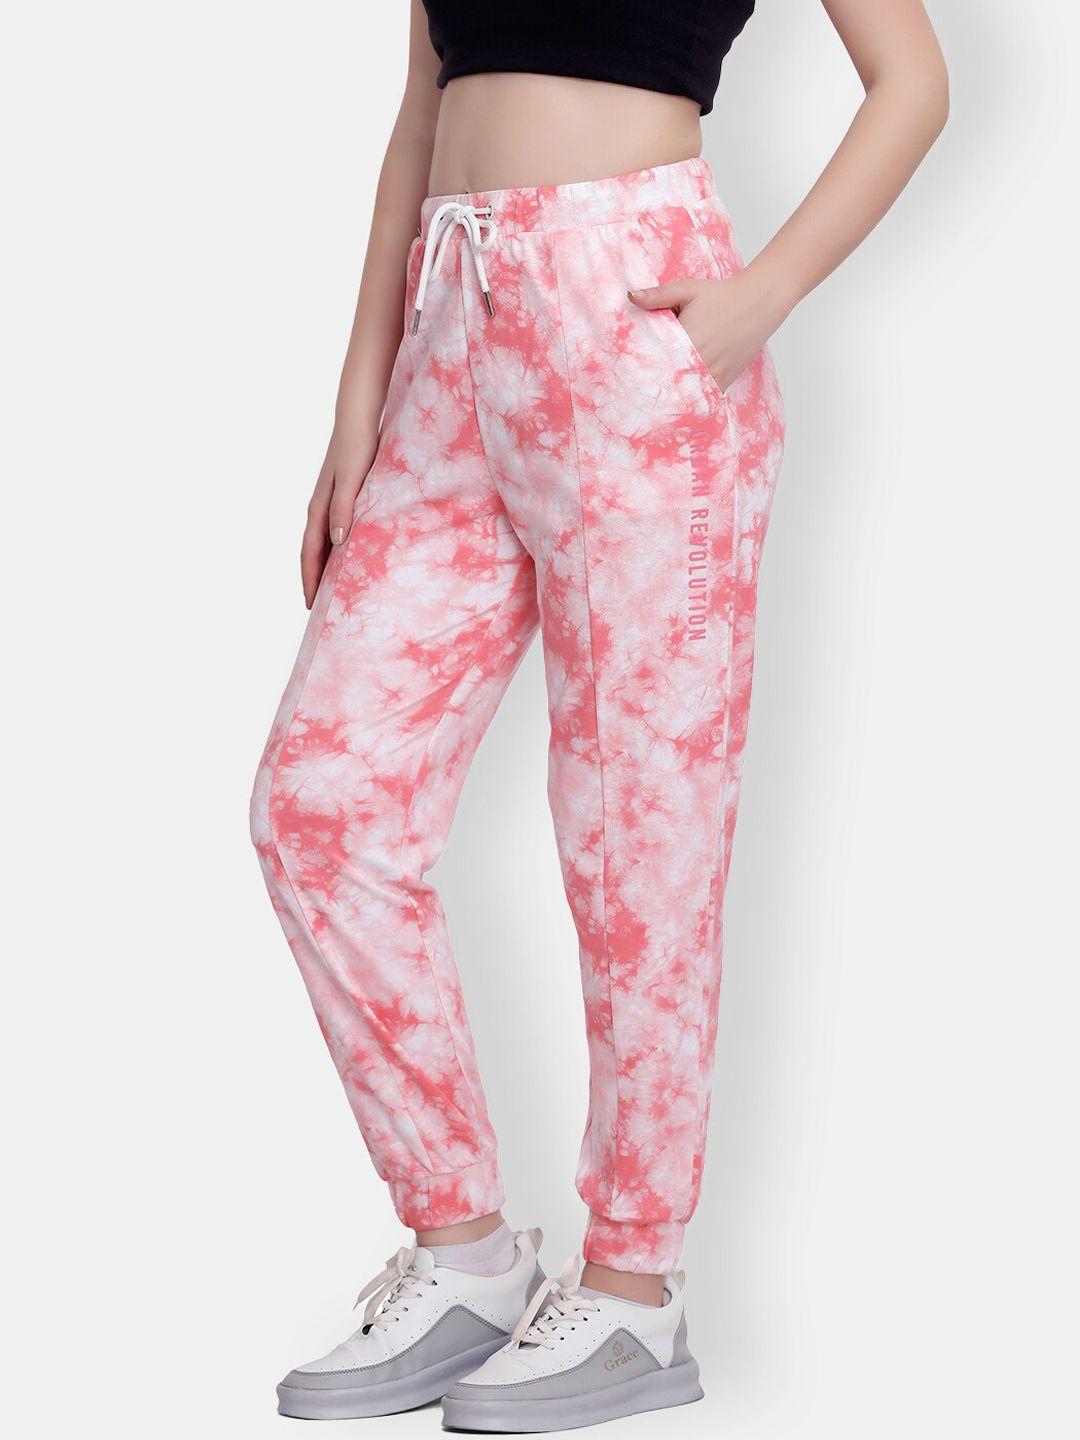 maysixty women dyed mid rise jogger